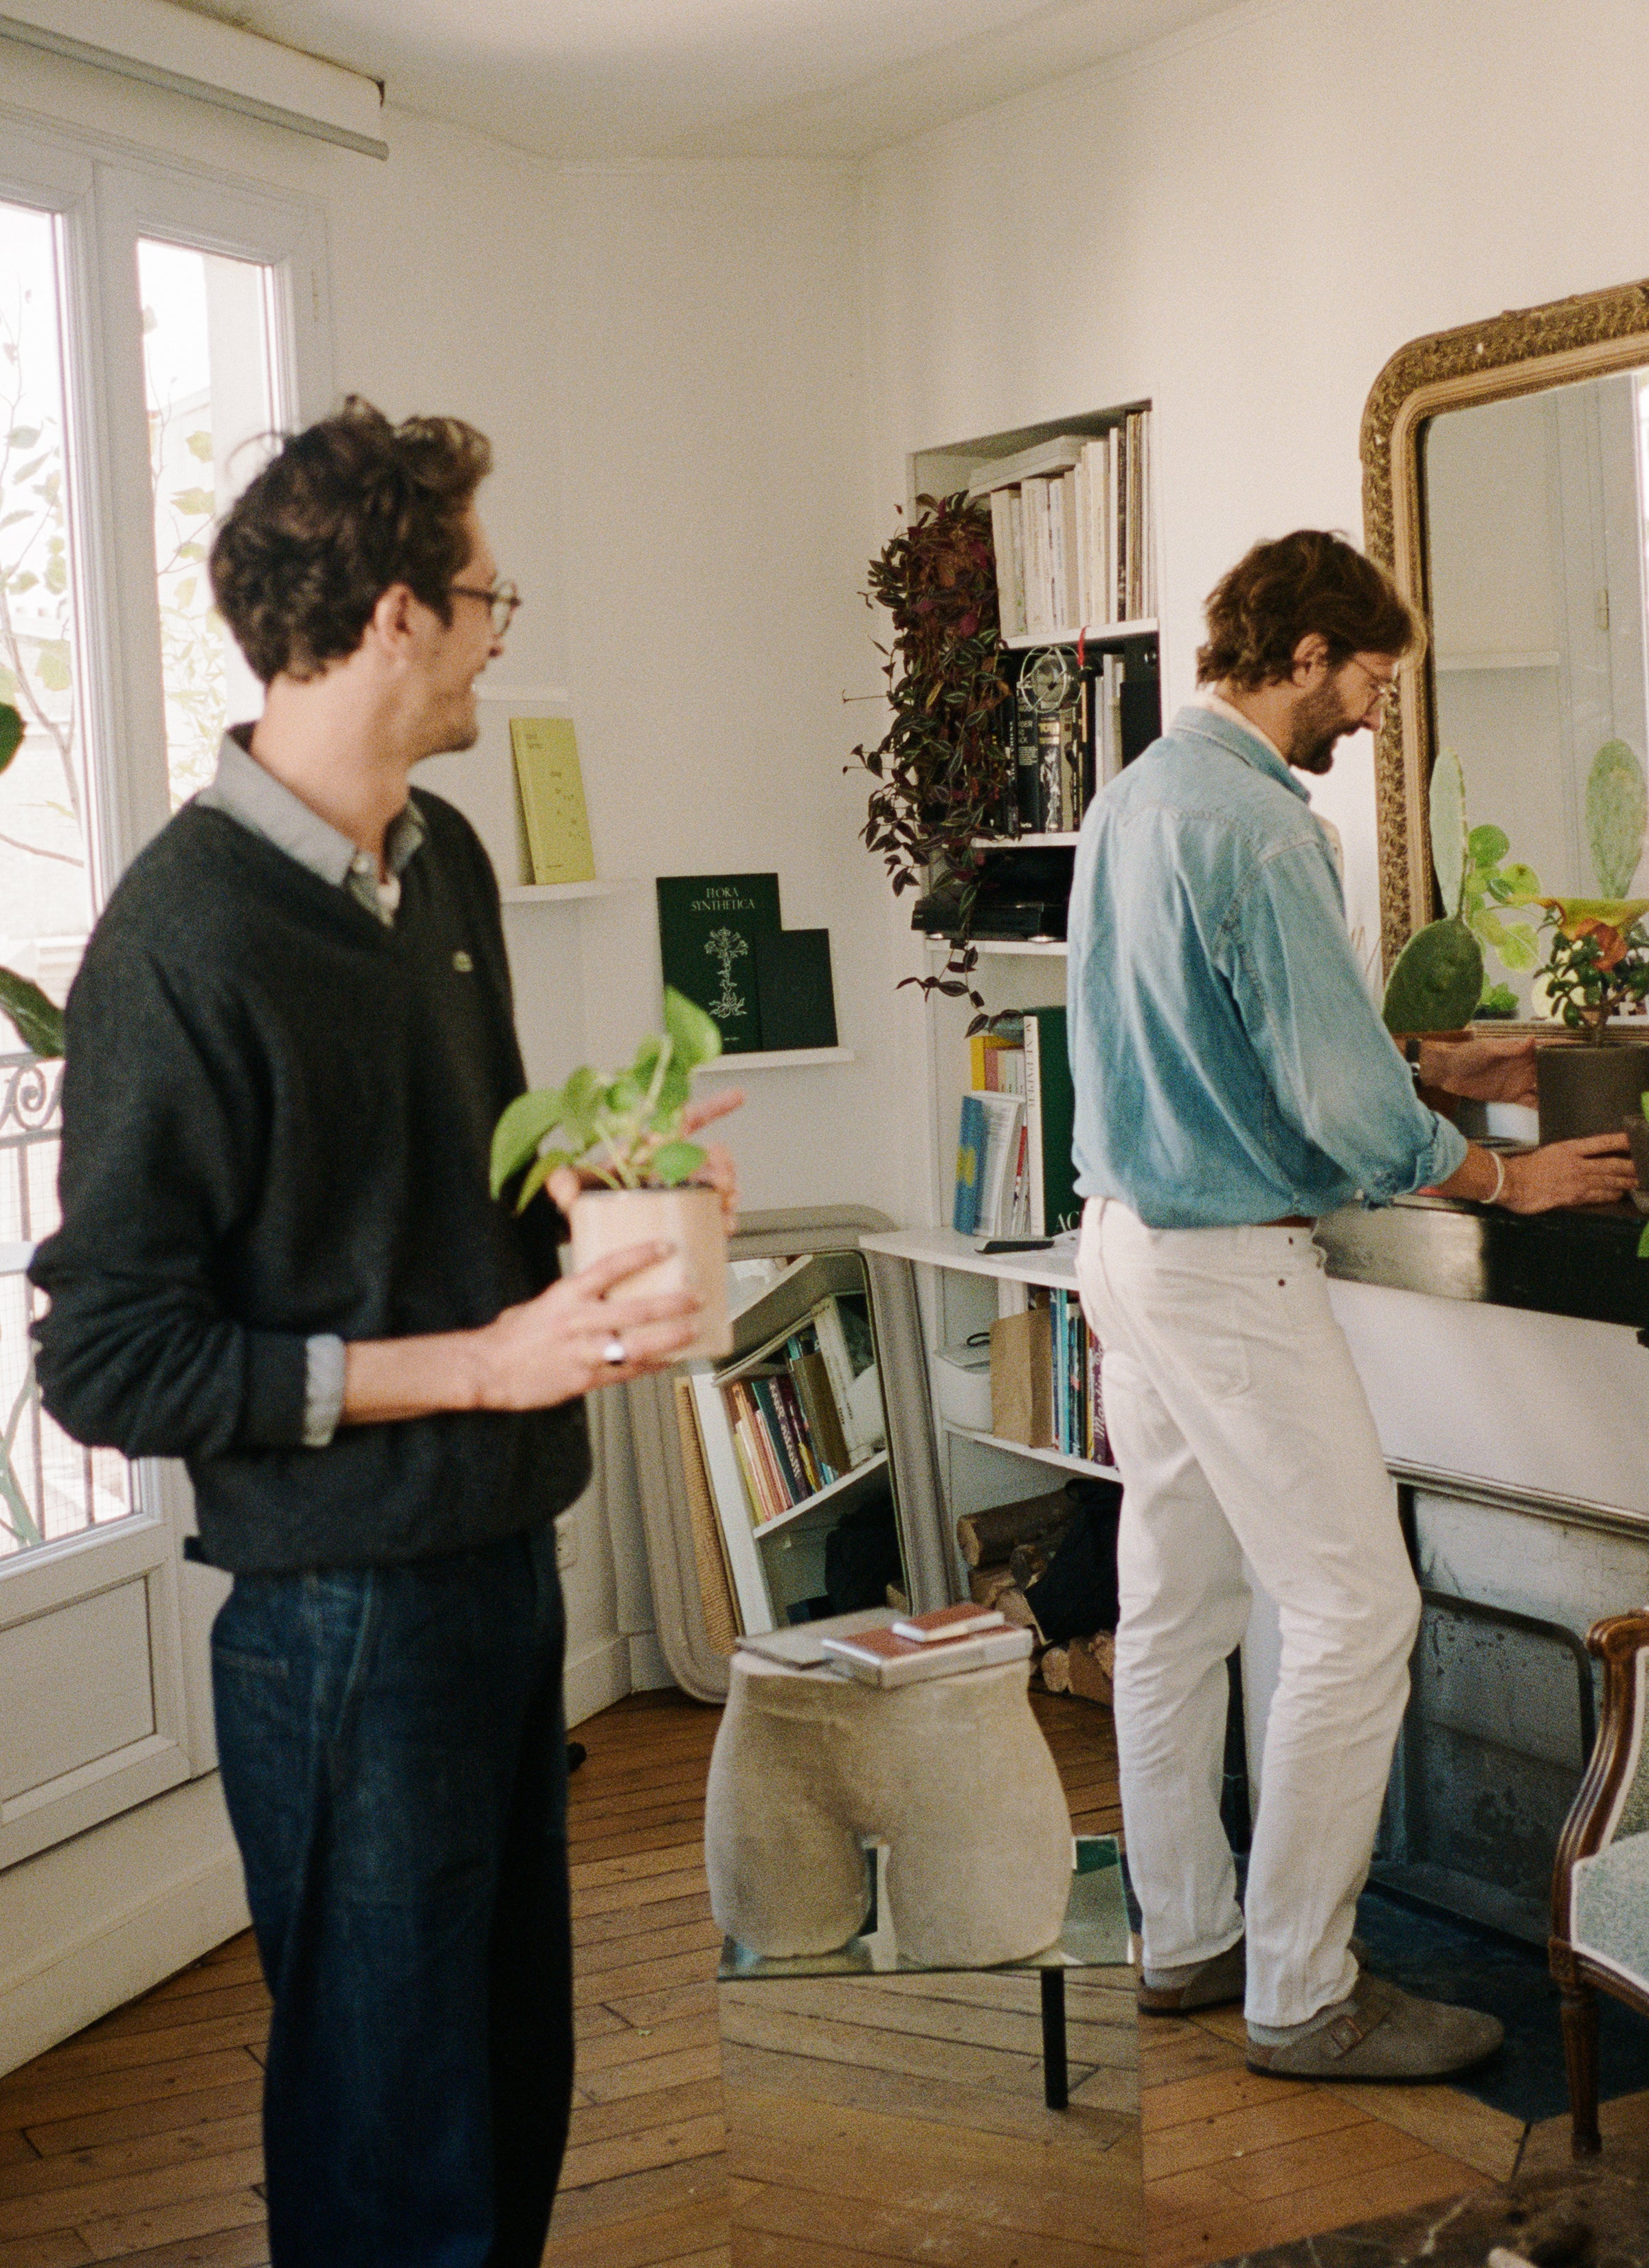 Mathias and Geoffery move pots of plants in their living room with a shelf of books and a buttock-like sculpture with books above it.